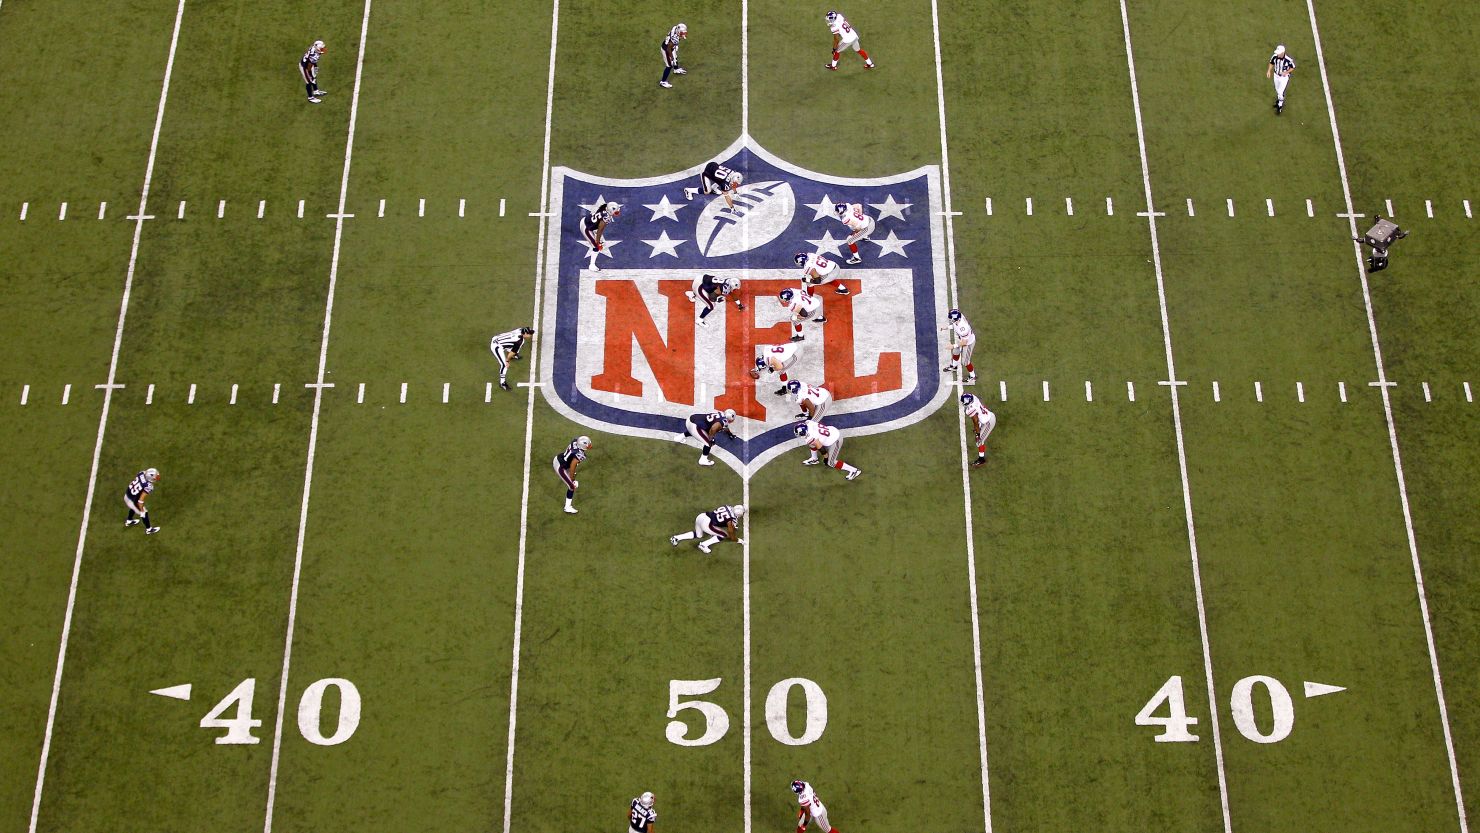 The NFL is the rare thing that brings all Americans – Democrats